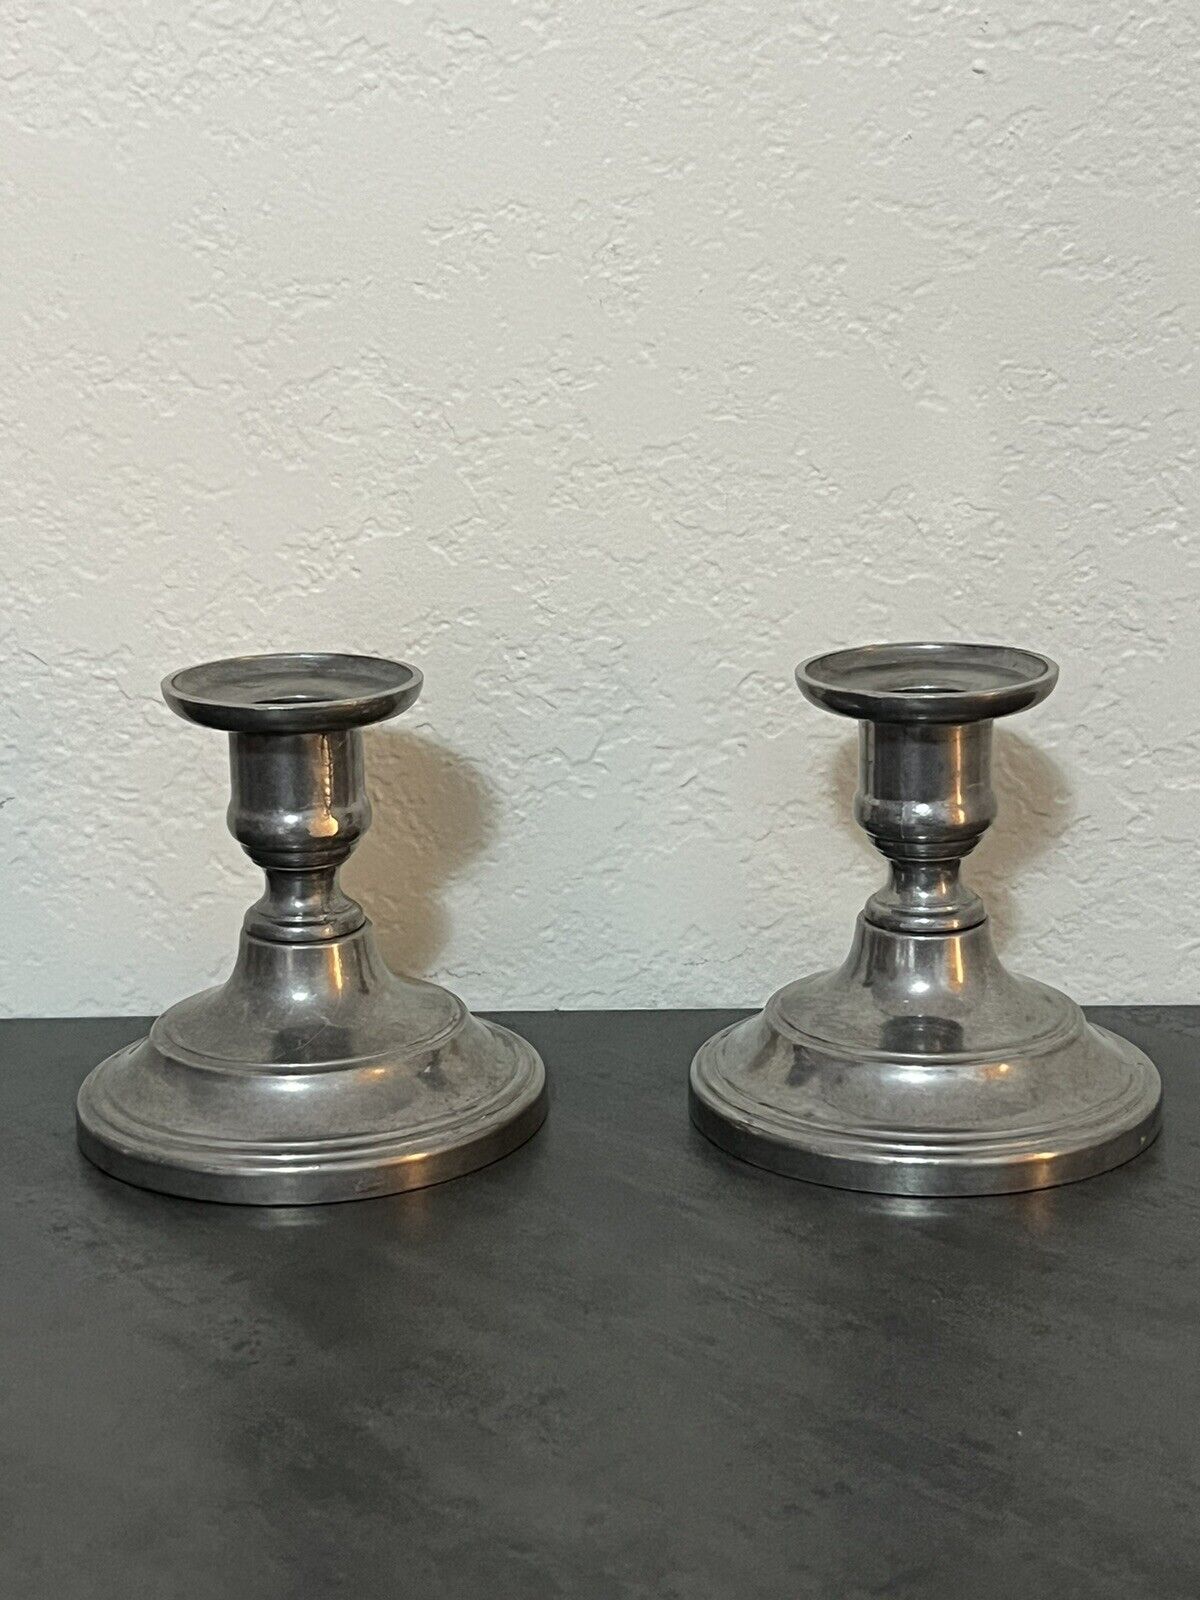 Vintage Duratale By Leonard Pewter Short Candle Sticks Made In Italy Pair Of Two